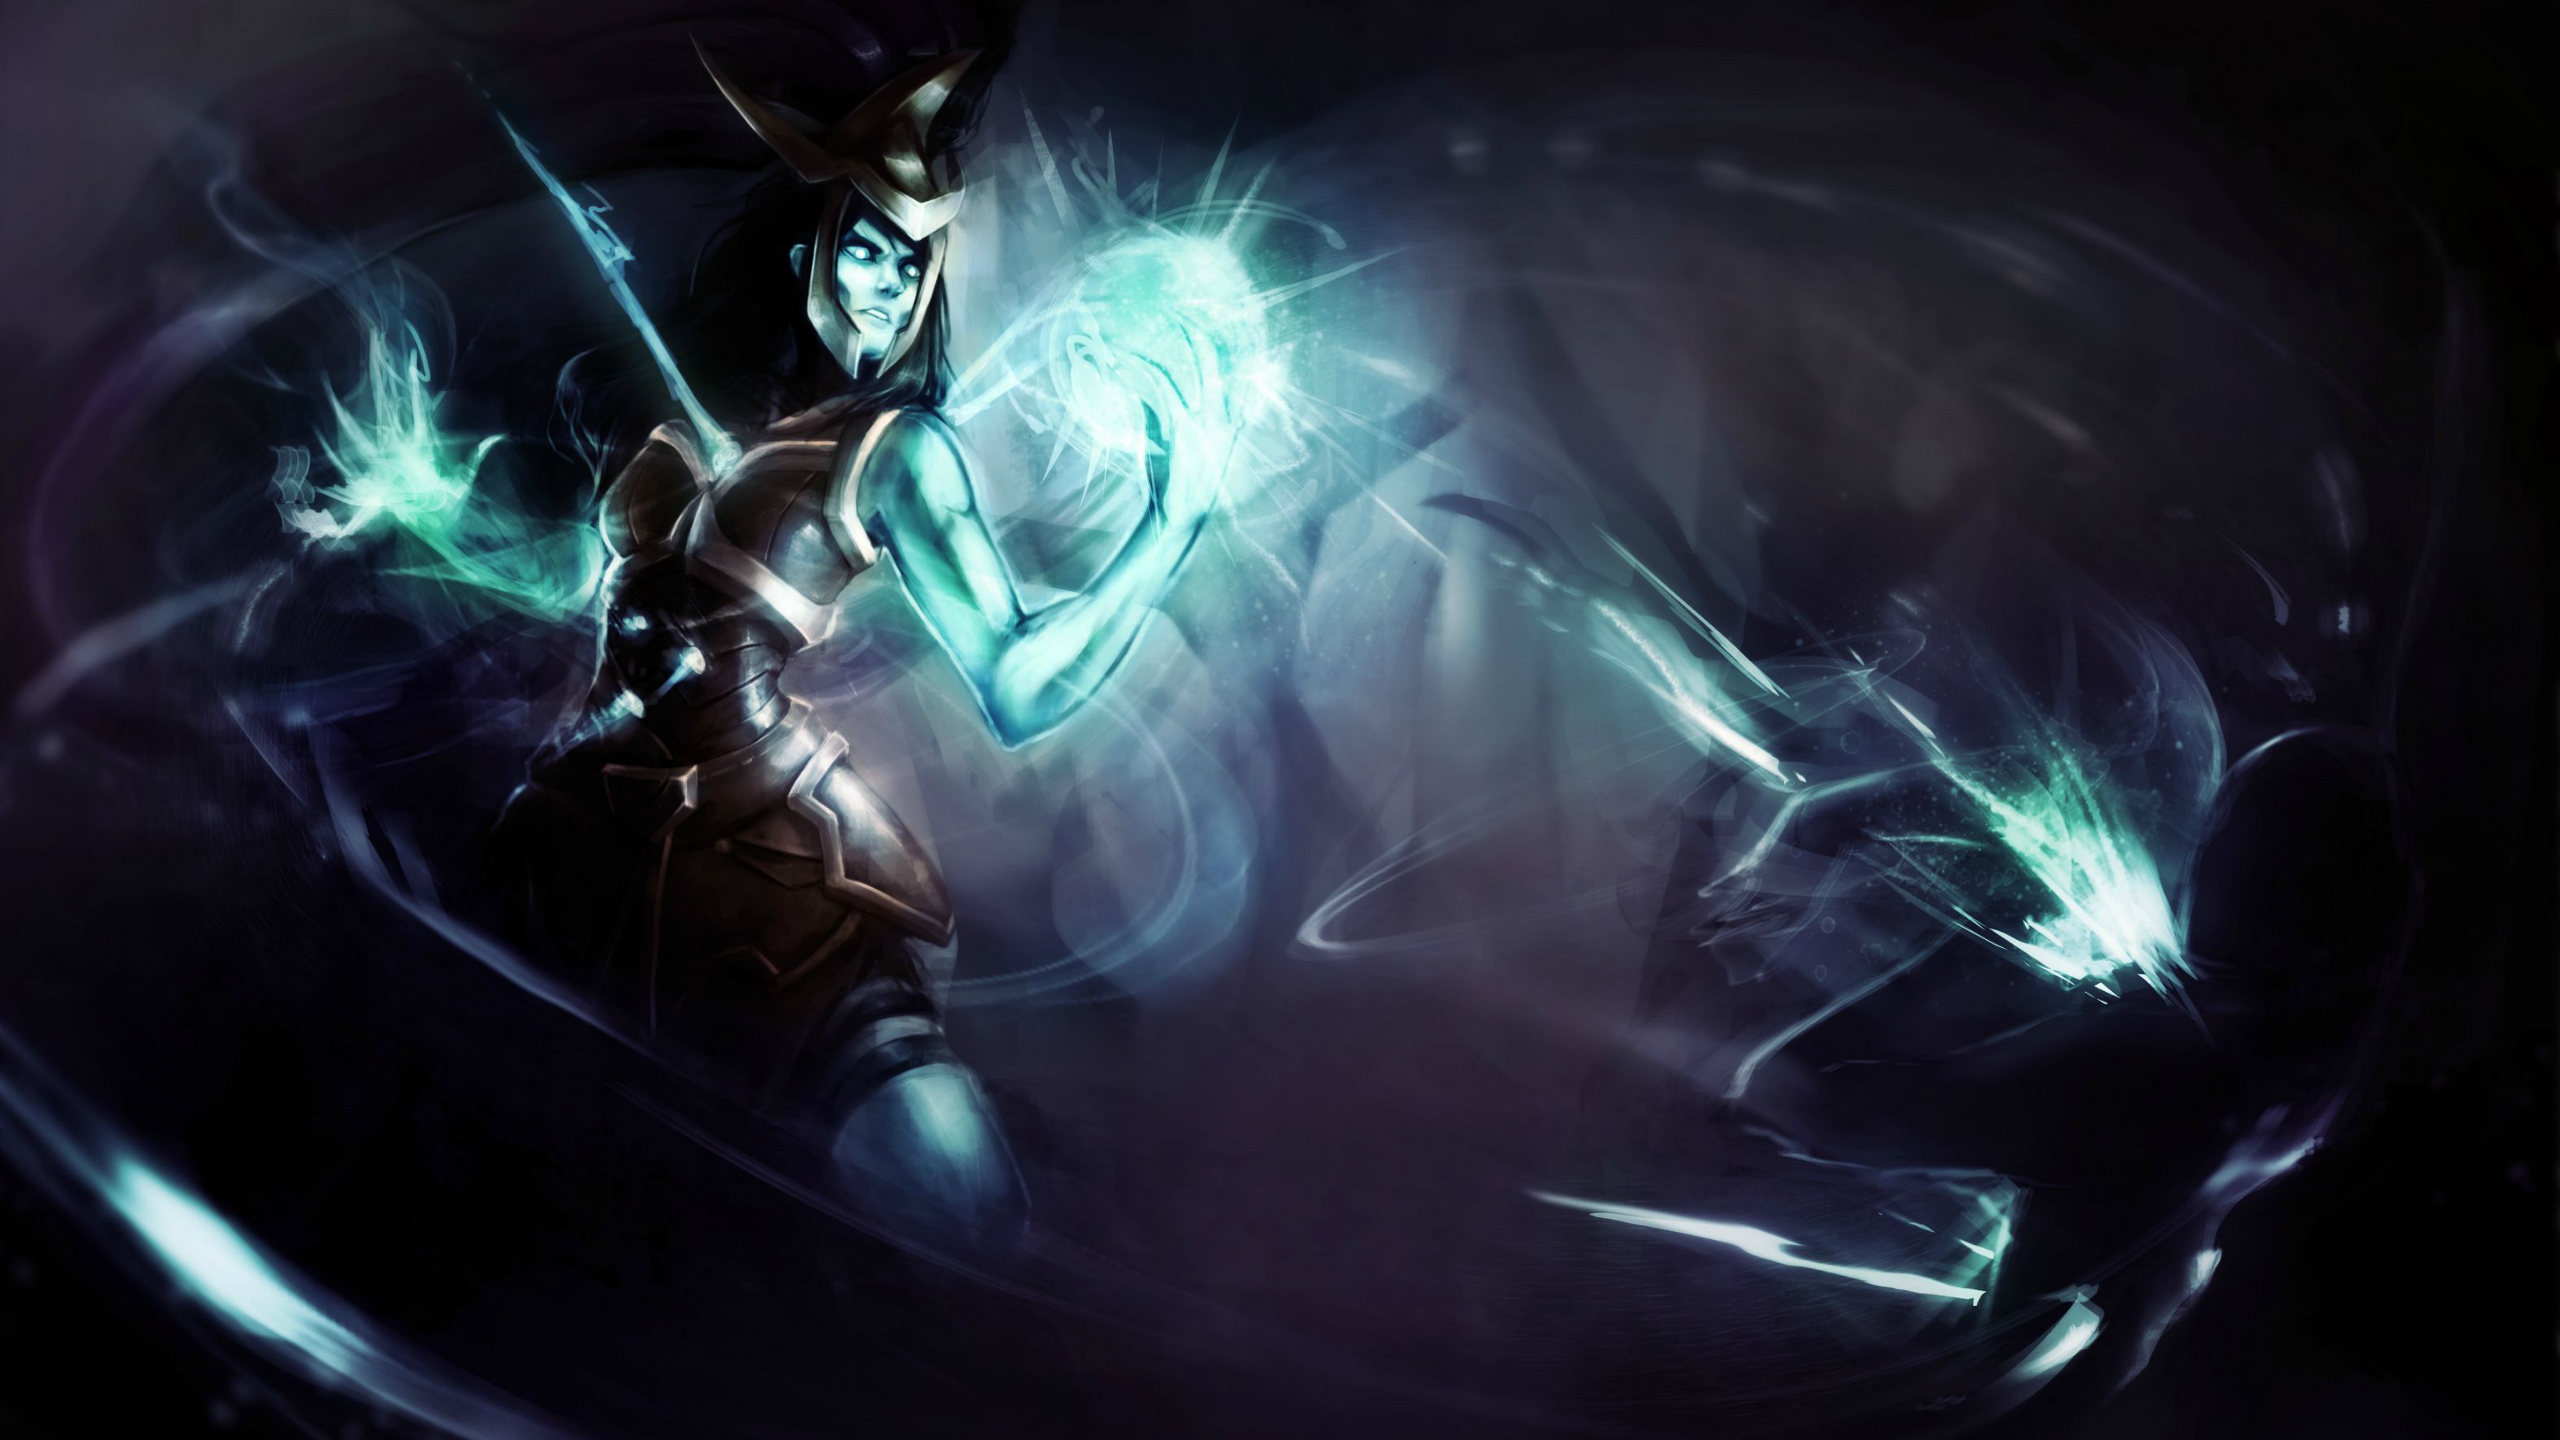 General 2560x1440 video games video game girls undead ghost League of Legends spear cyan PC gaming Kalista (League of Legends) video game art fantasy art fantasy girl